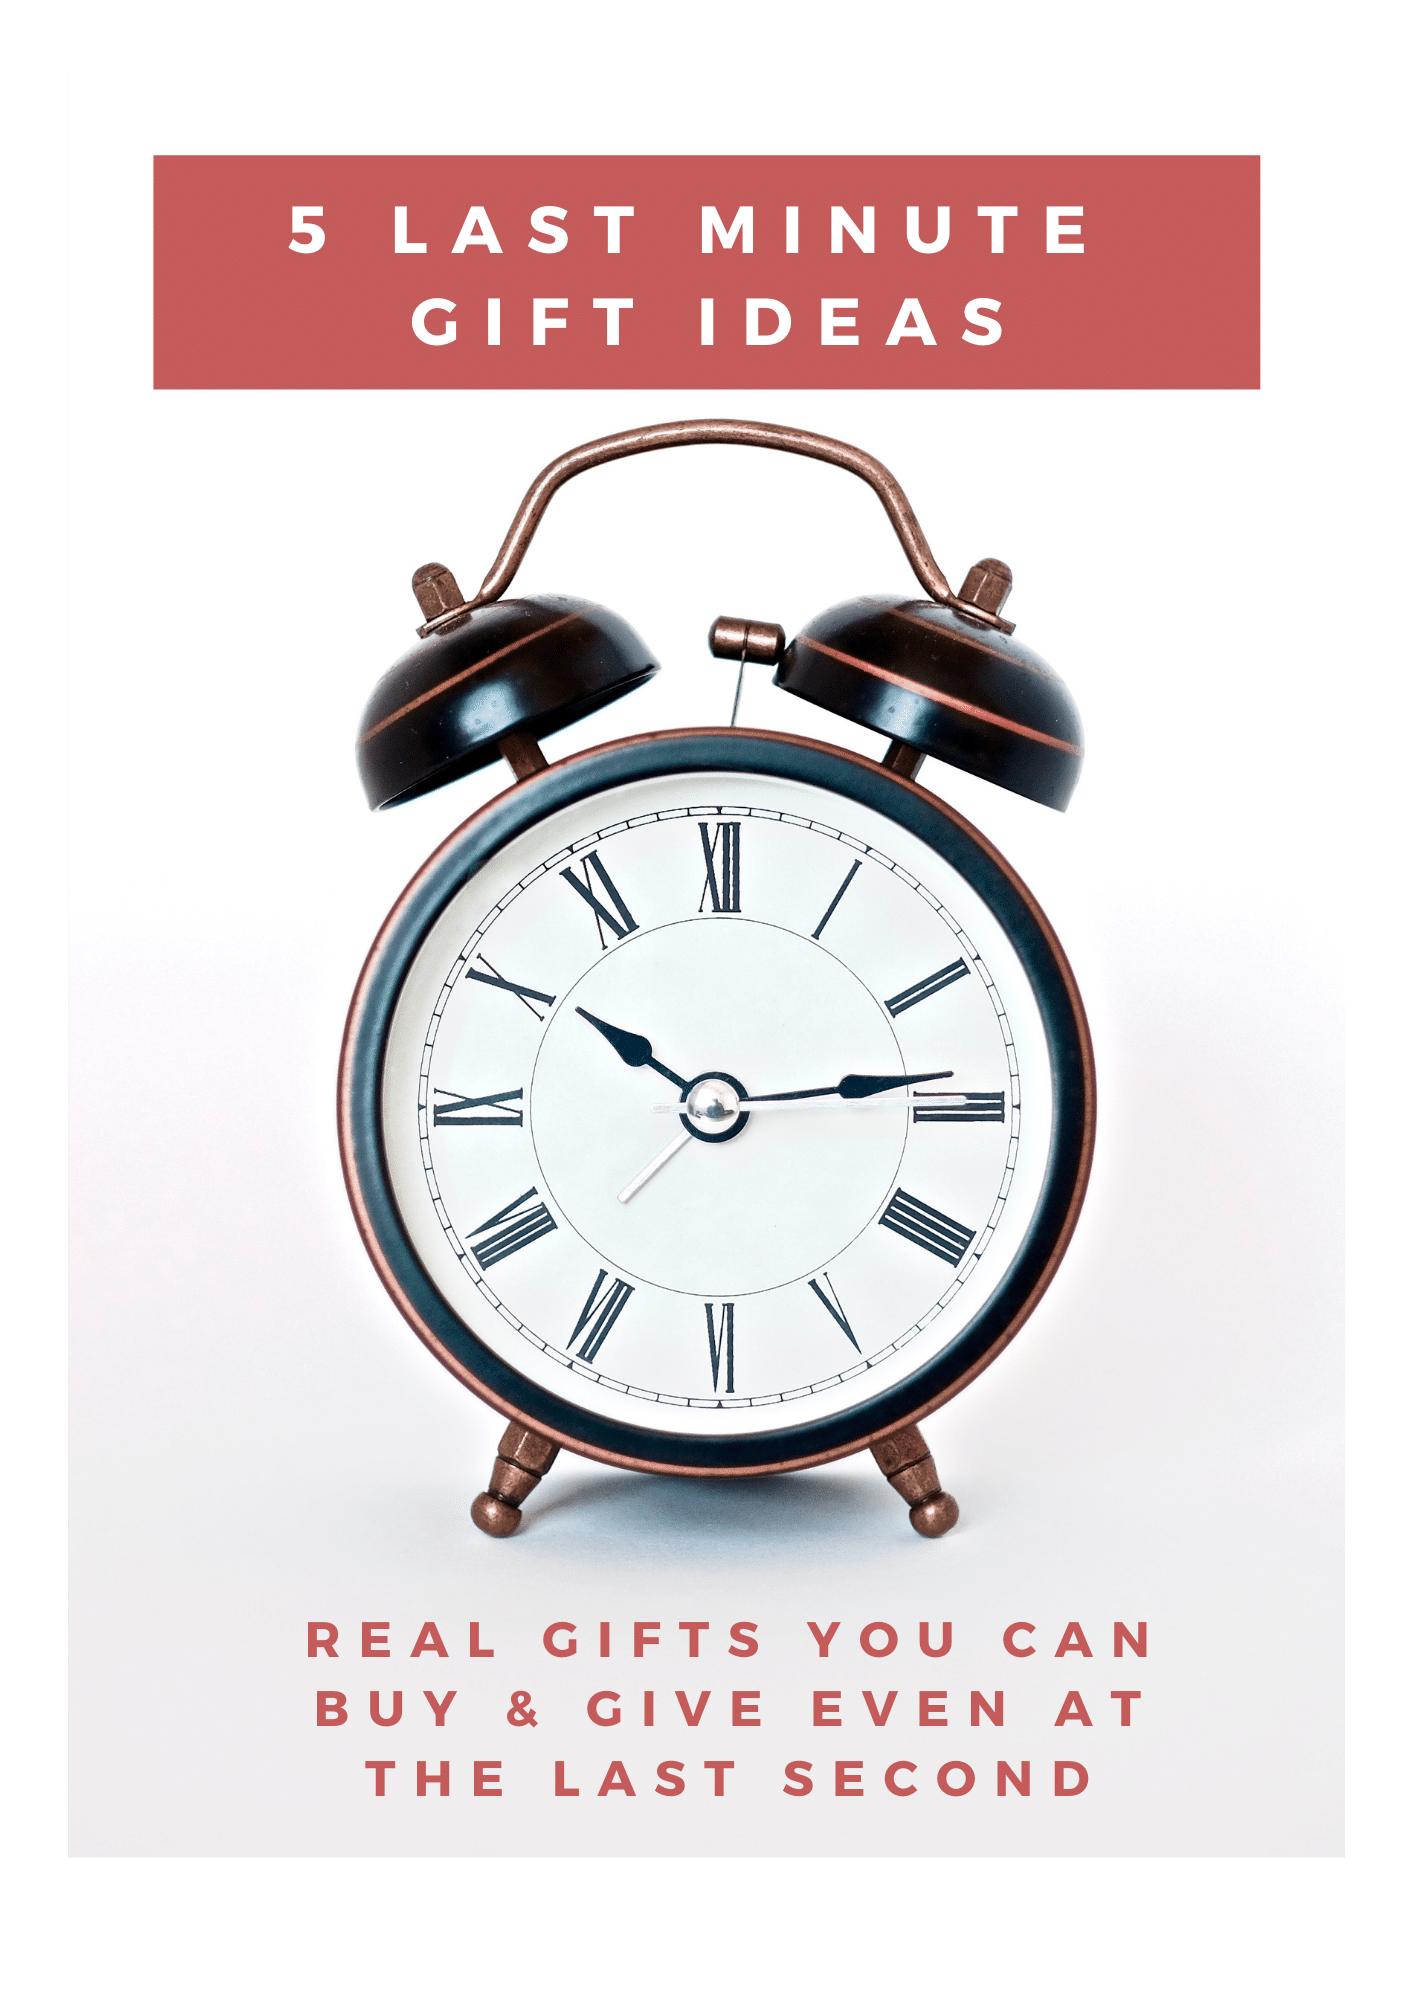 7 Truly Last Minute Gift Ideas Almost Anyone Will Love